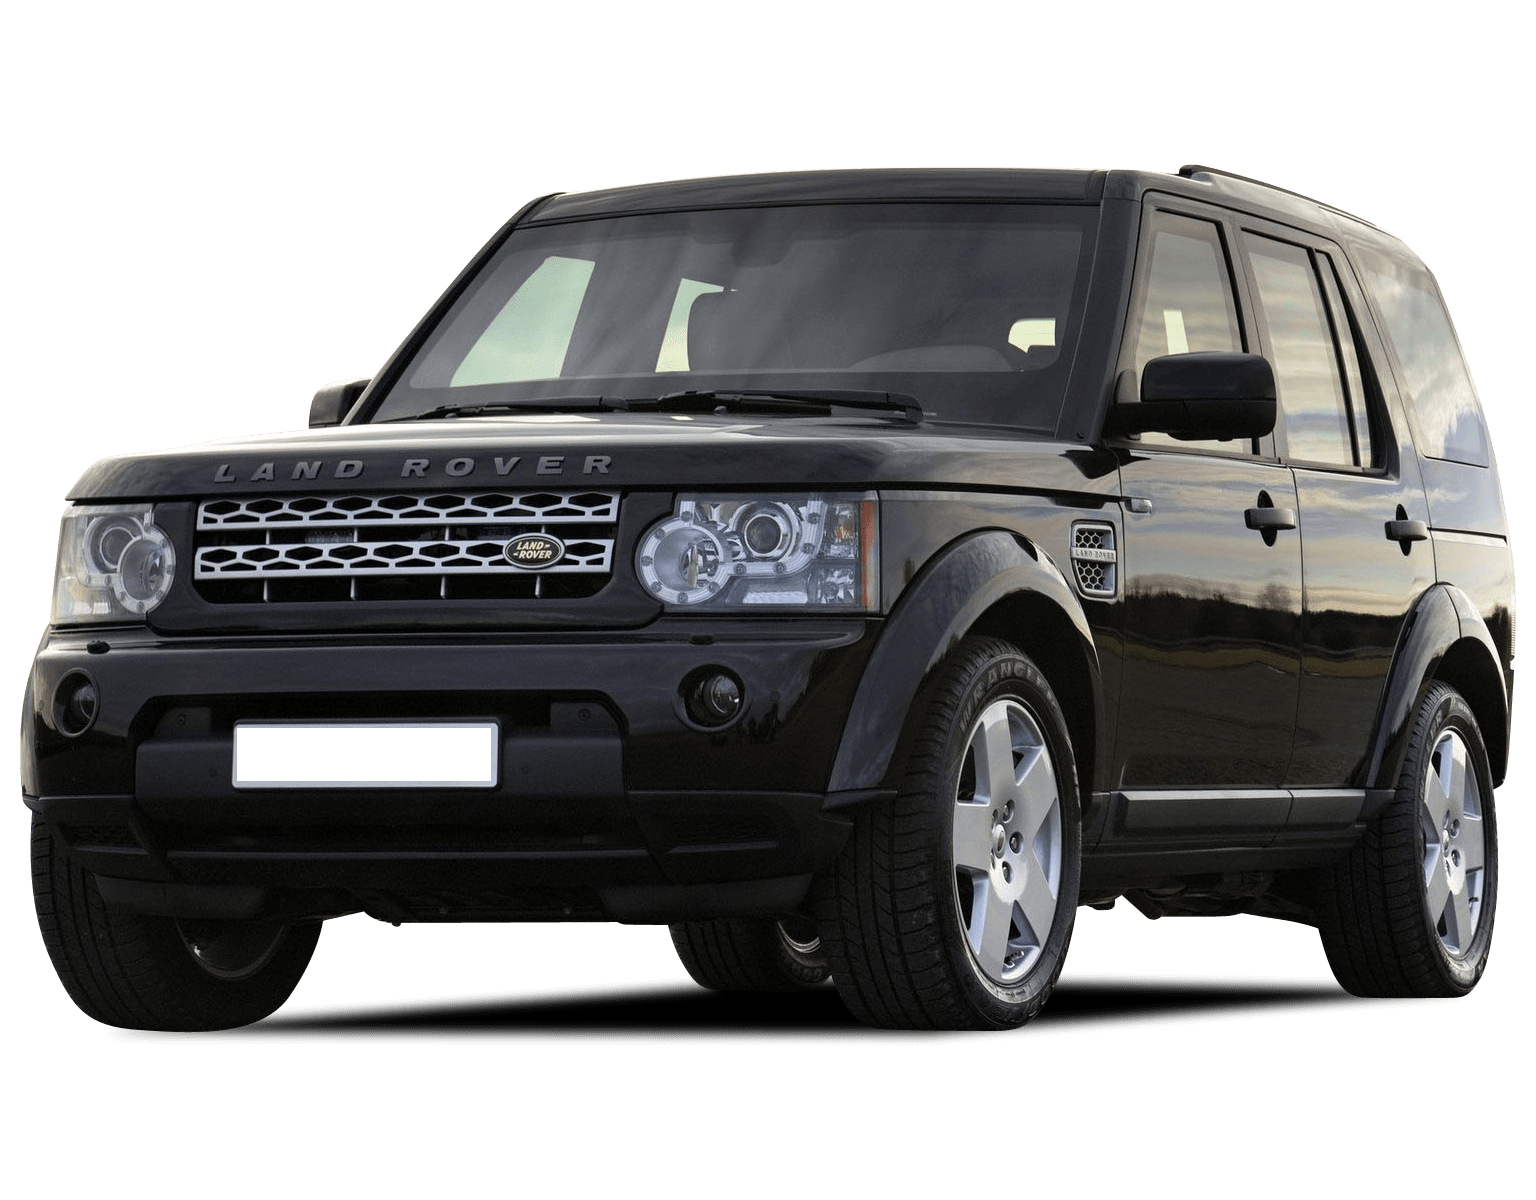 Л ровер дискавери. Land Rover Discovery 4. Рендж Ровер Дискавери 3. Ленд Ровер Дискавери 4 2011. Range Rover Discovery 3.